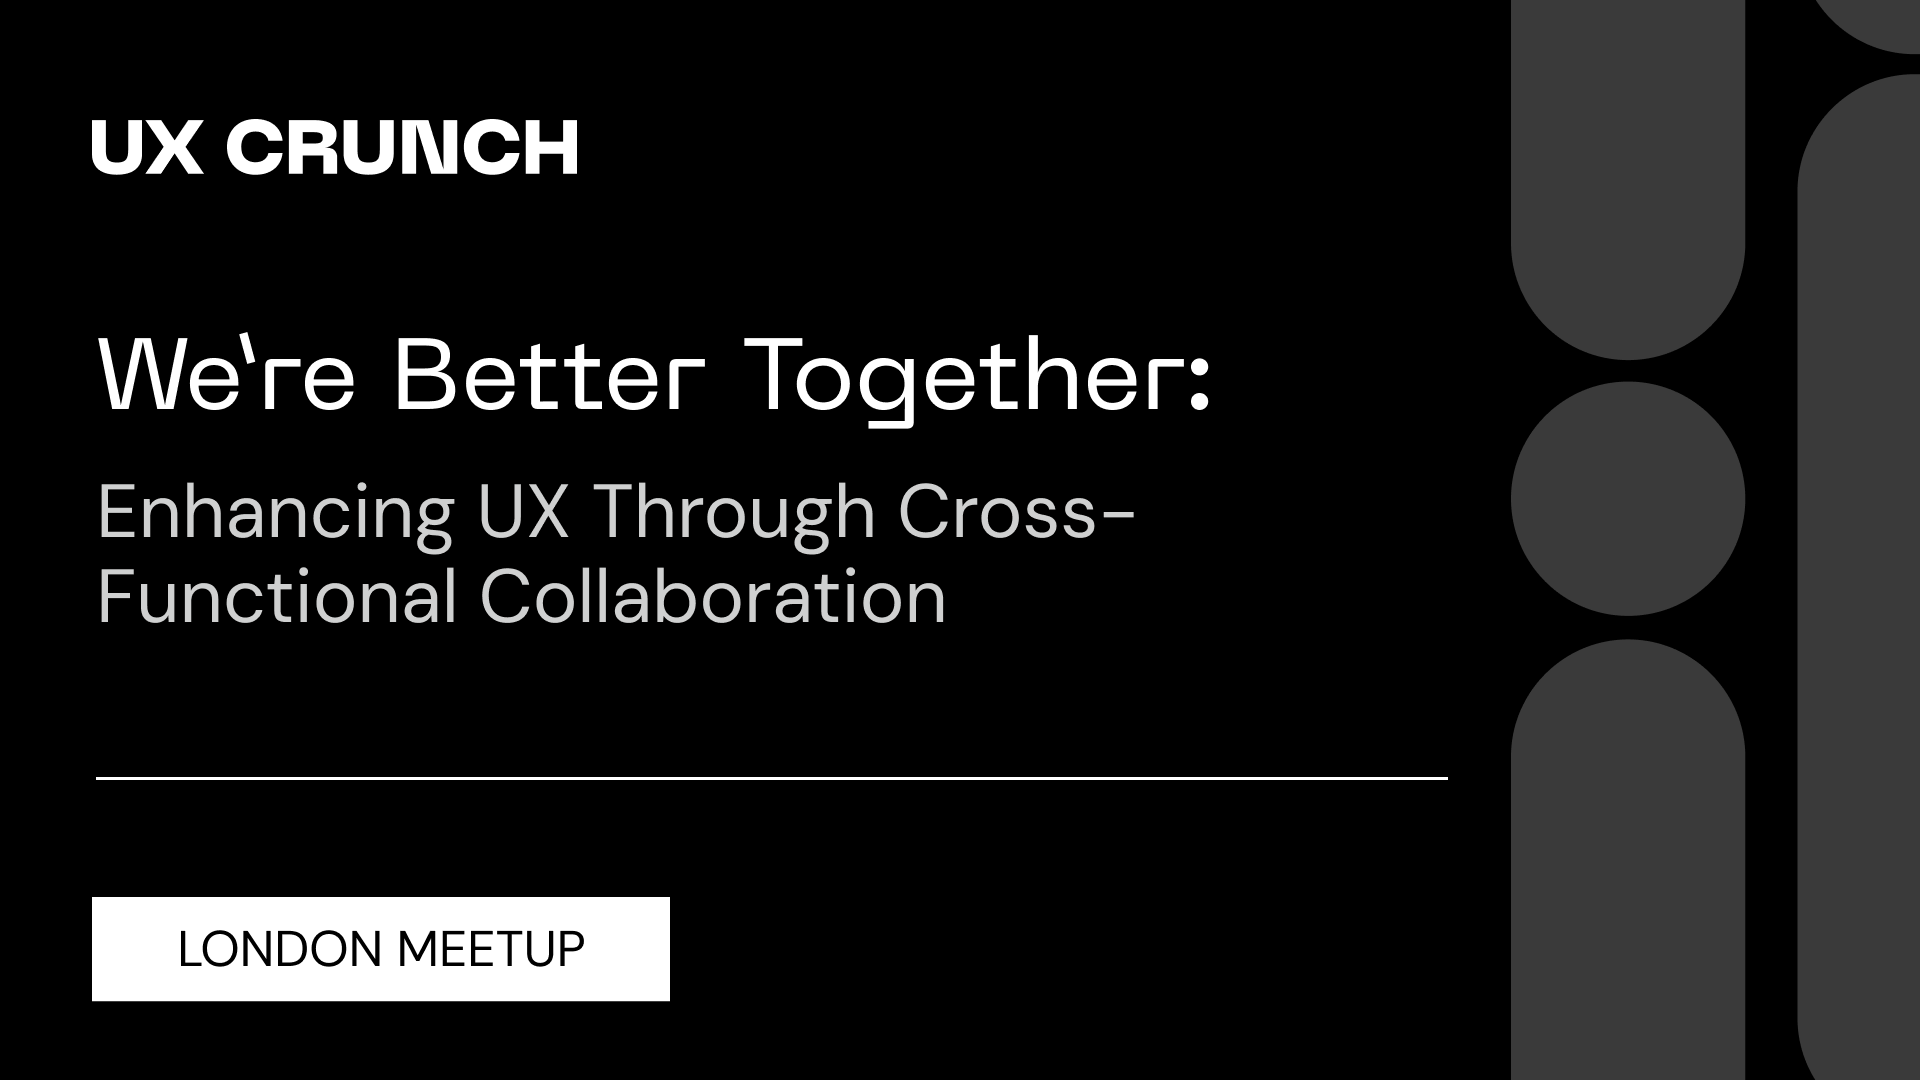 We’re Better Together: Enhancing UX Through Cross-Functional Collaboration